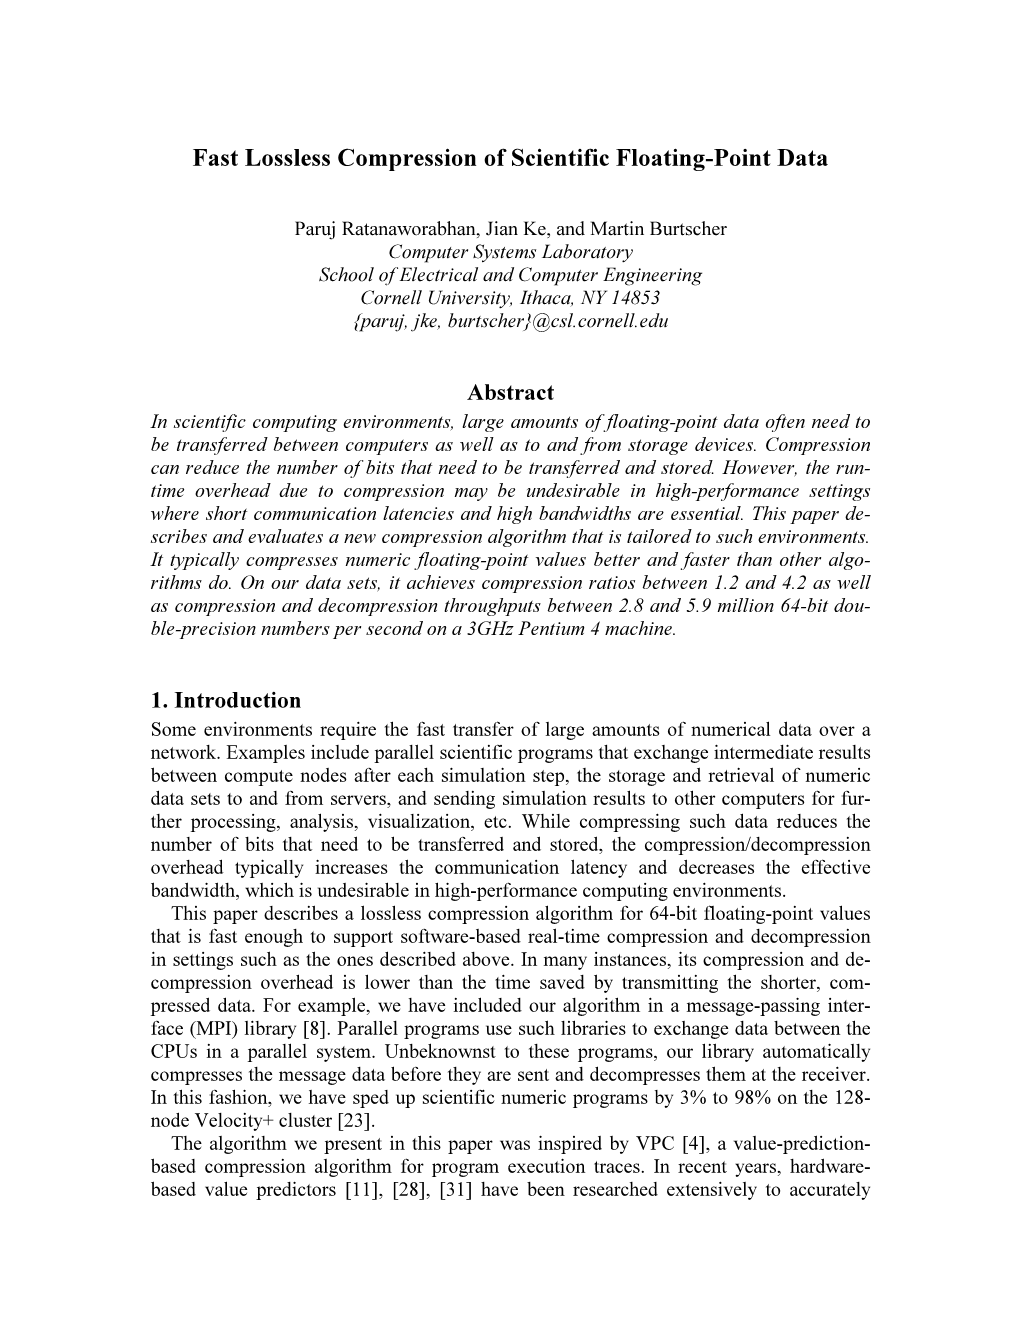 Fast Lossless Compression of Scientific Floating-Point Data